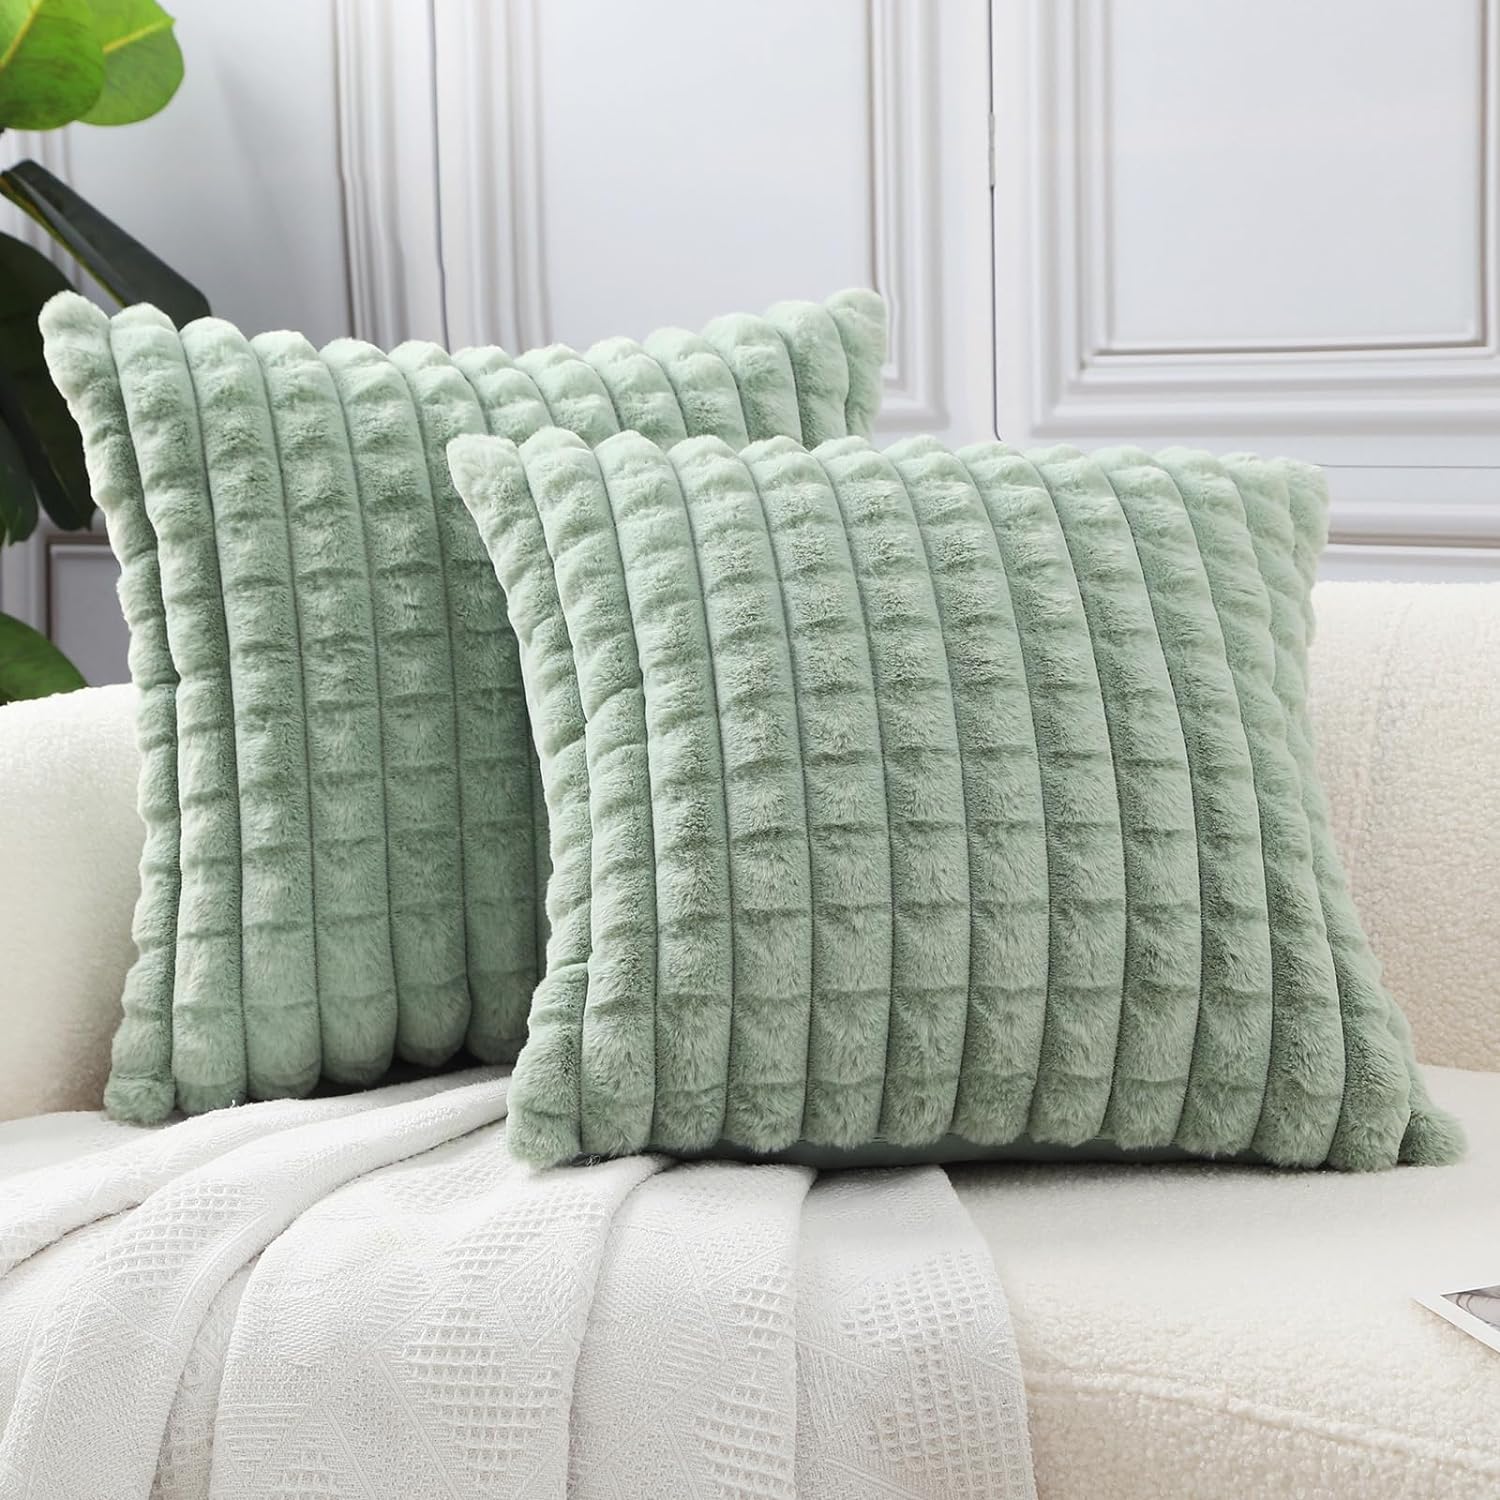 HPUK Faux Fur Plush Square Throw Pillow Covers 18x18 Inch, Decorative Fluffy Couch Pillow Covers for Living Room, Accent Cozy and Fuzzy Pillow Covers for Couch, Sofa, and Bedroom(Sage Green)